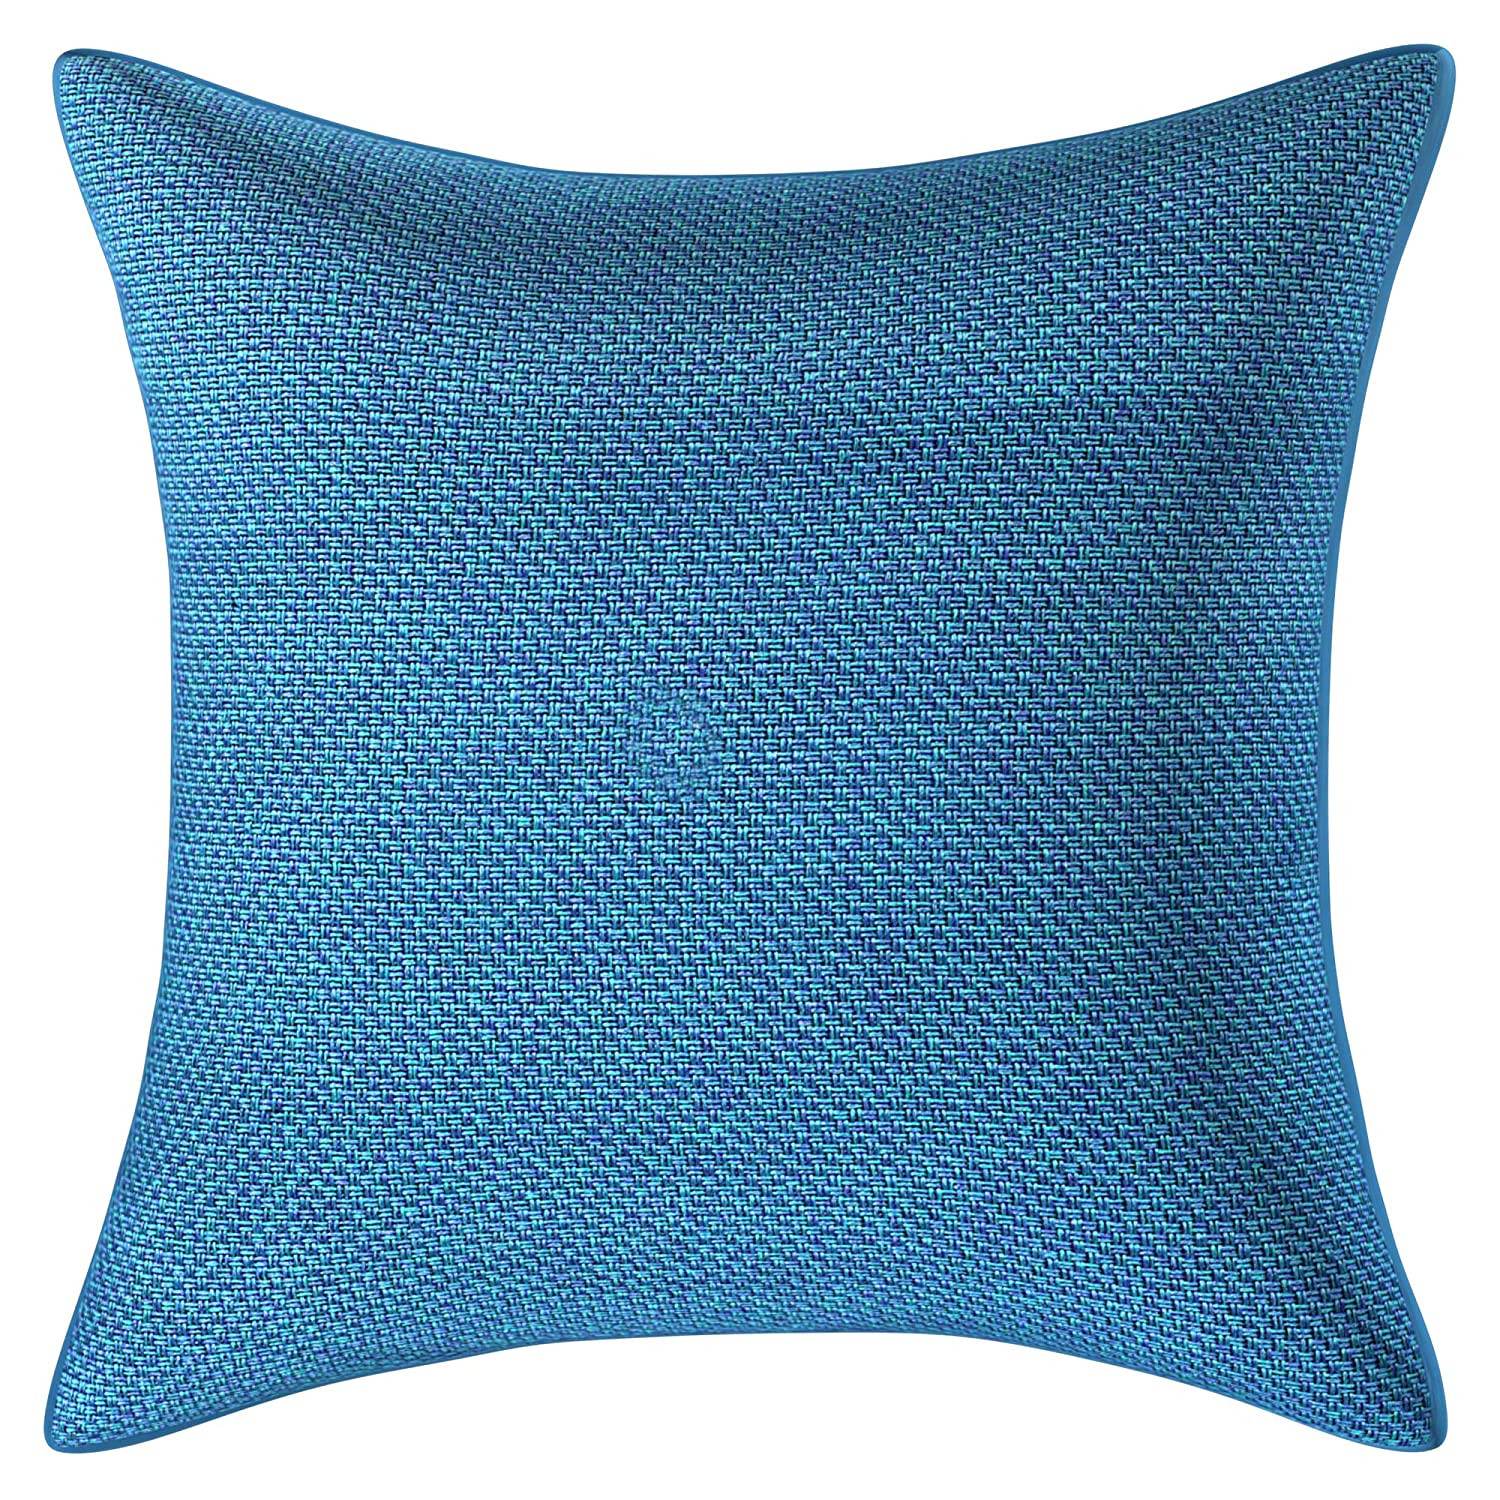 Kuber Industries Jute Blend Decorative Square Throw Pillow Cover Cushion Covers Pillowcase, Home Decor Decorations for Sofa Couch Bed Chair 16x16 Inch-(Blue)